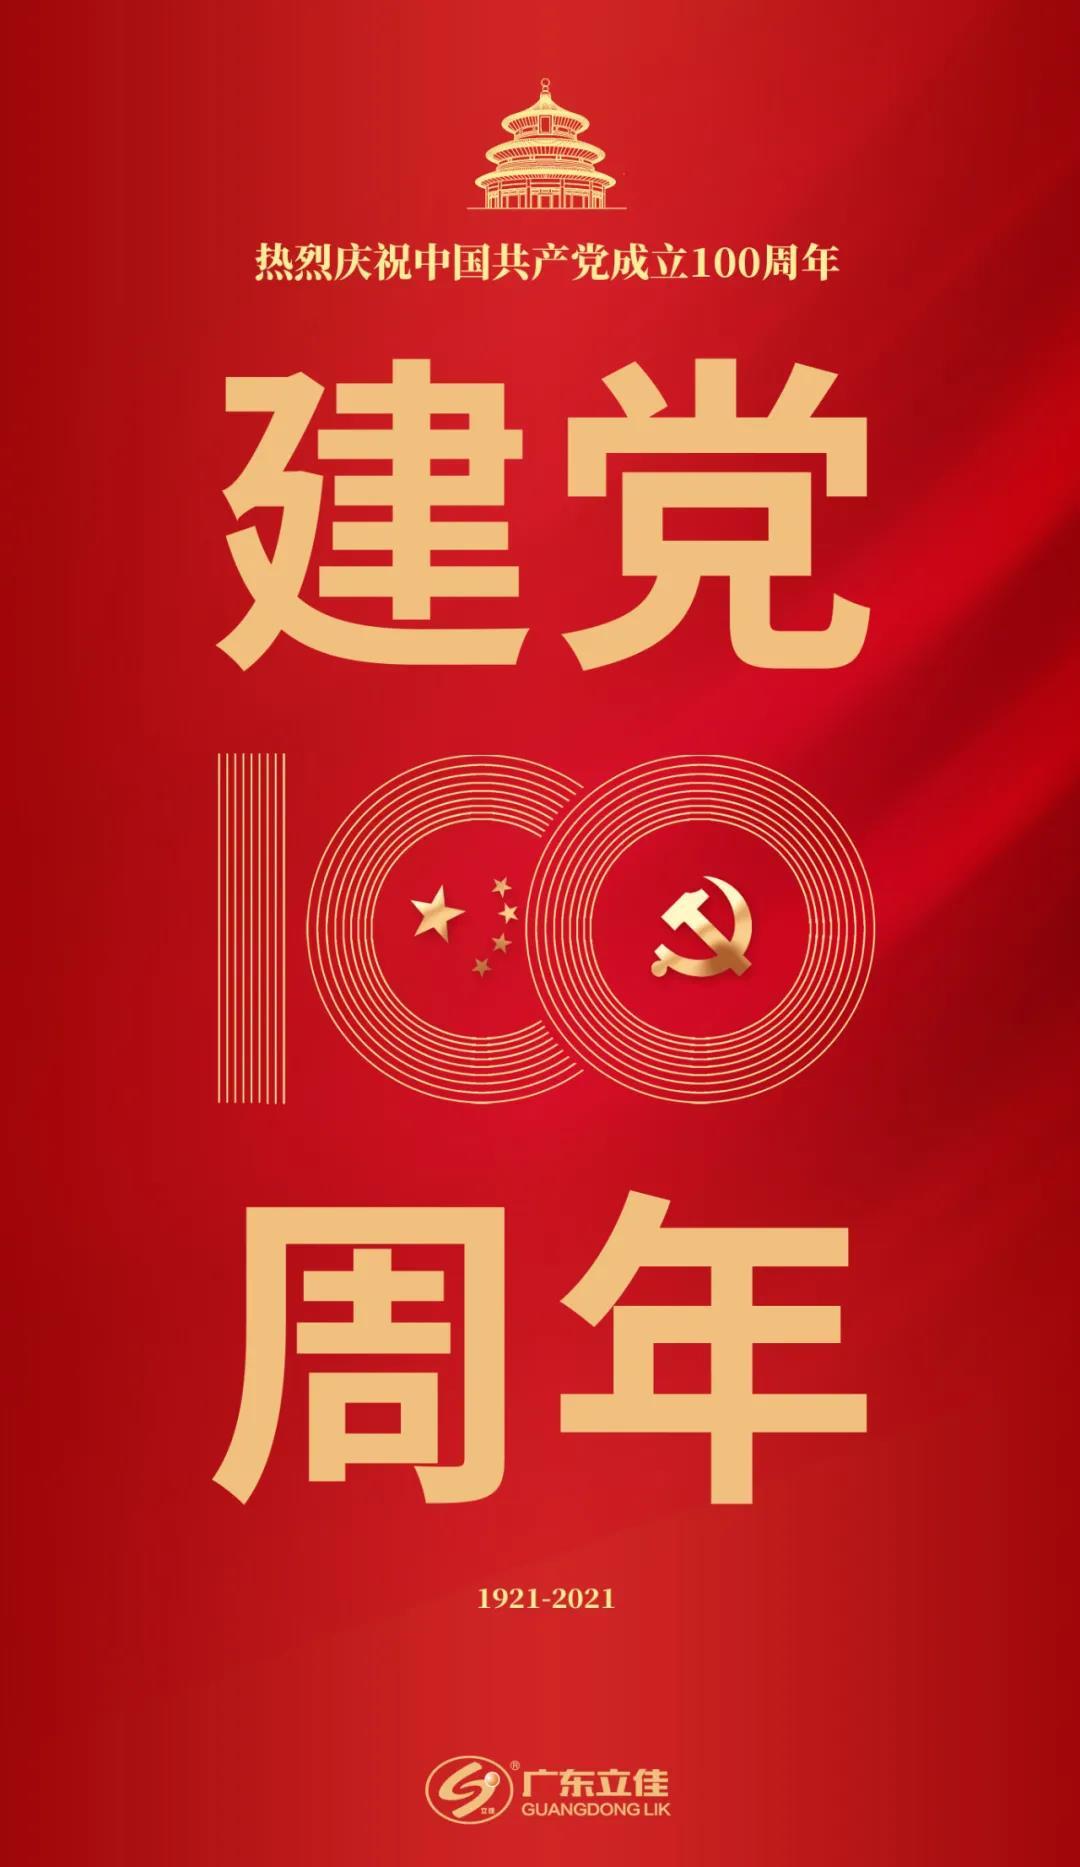 Warmly celebrate the 100 anniversary of the founding of the Communist Party of China